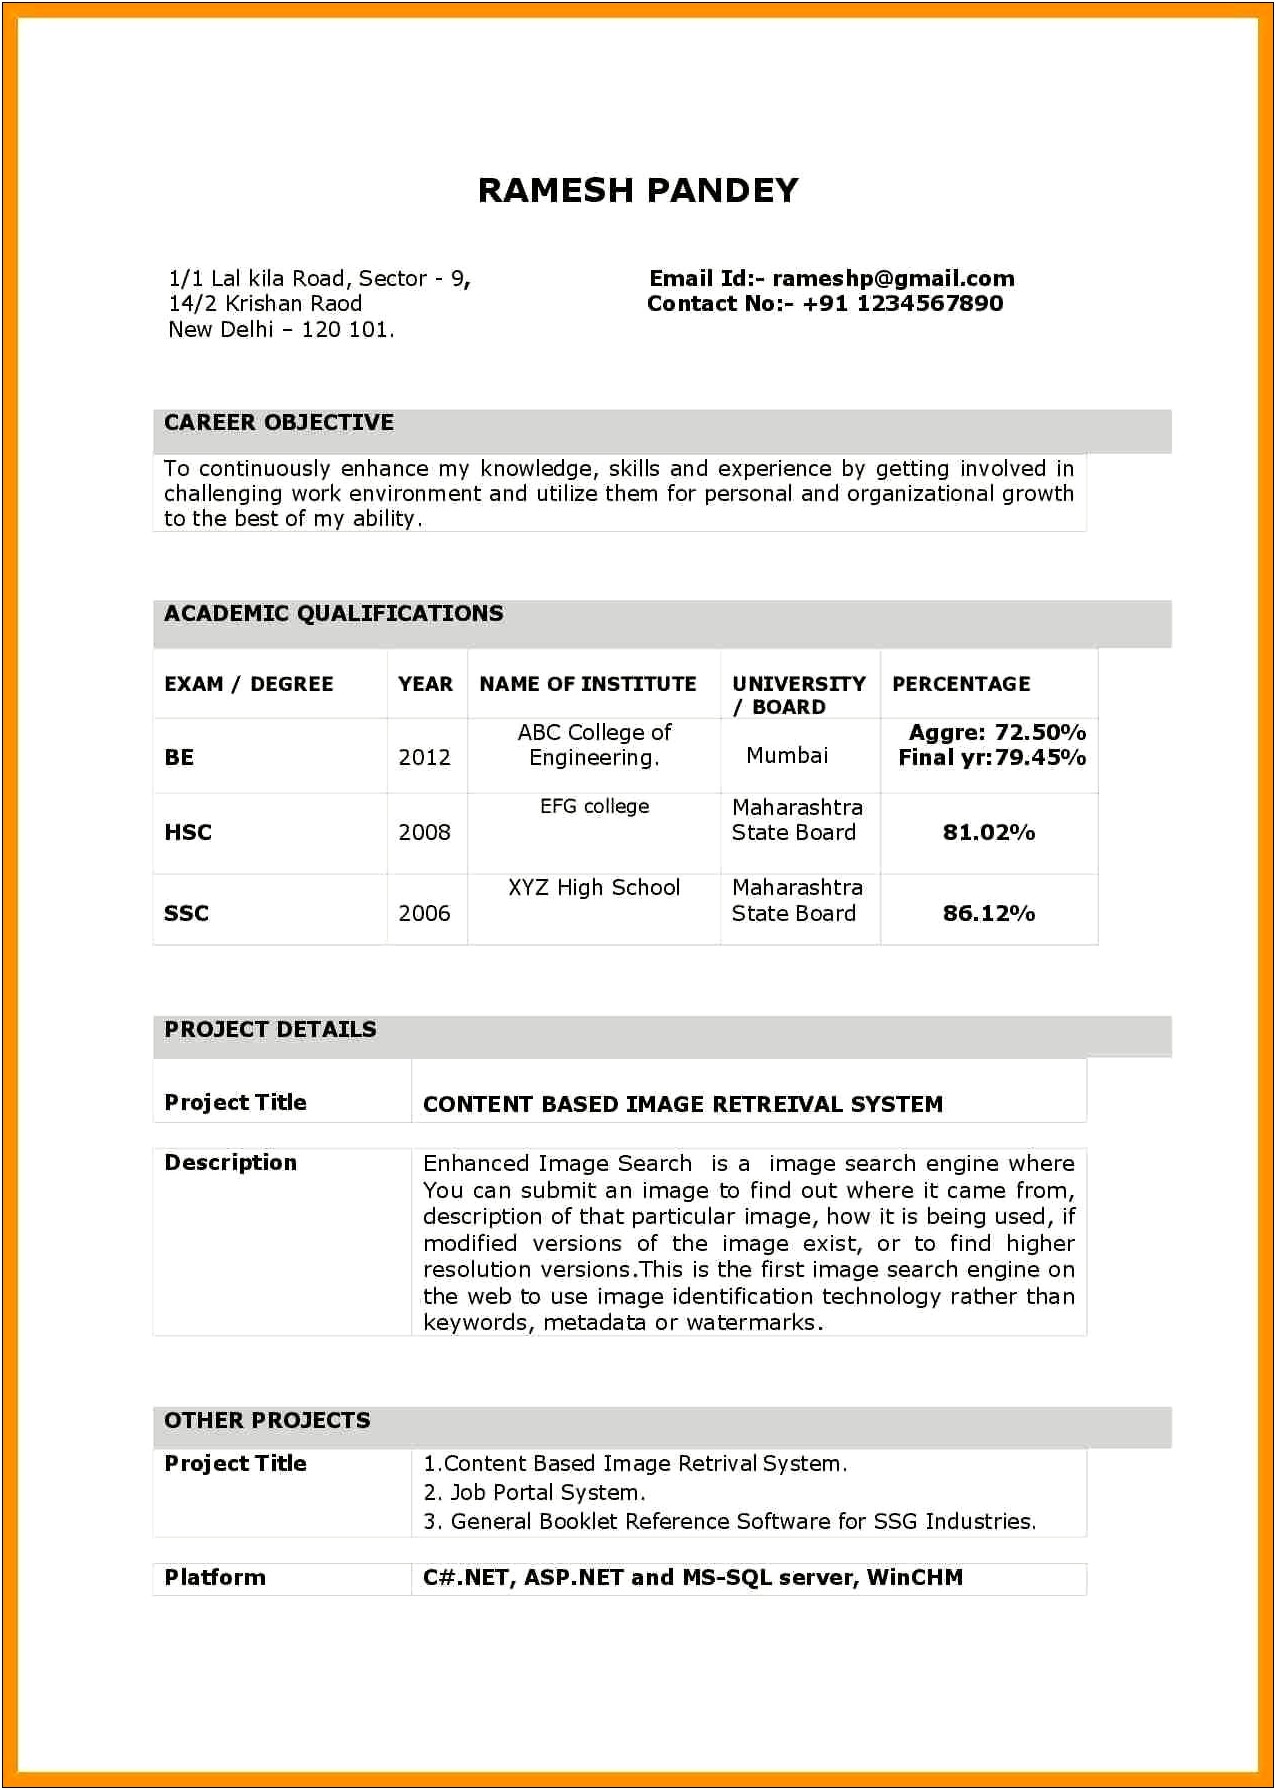 Resume Format Free Download In India